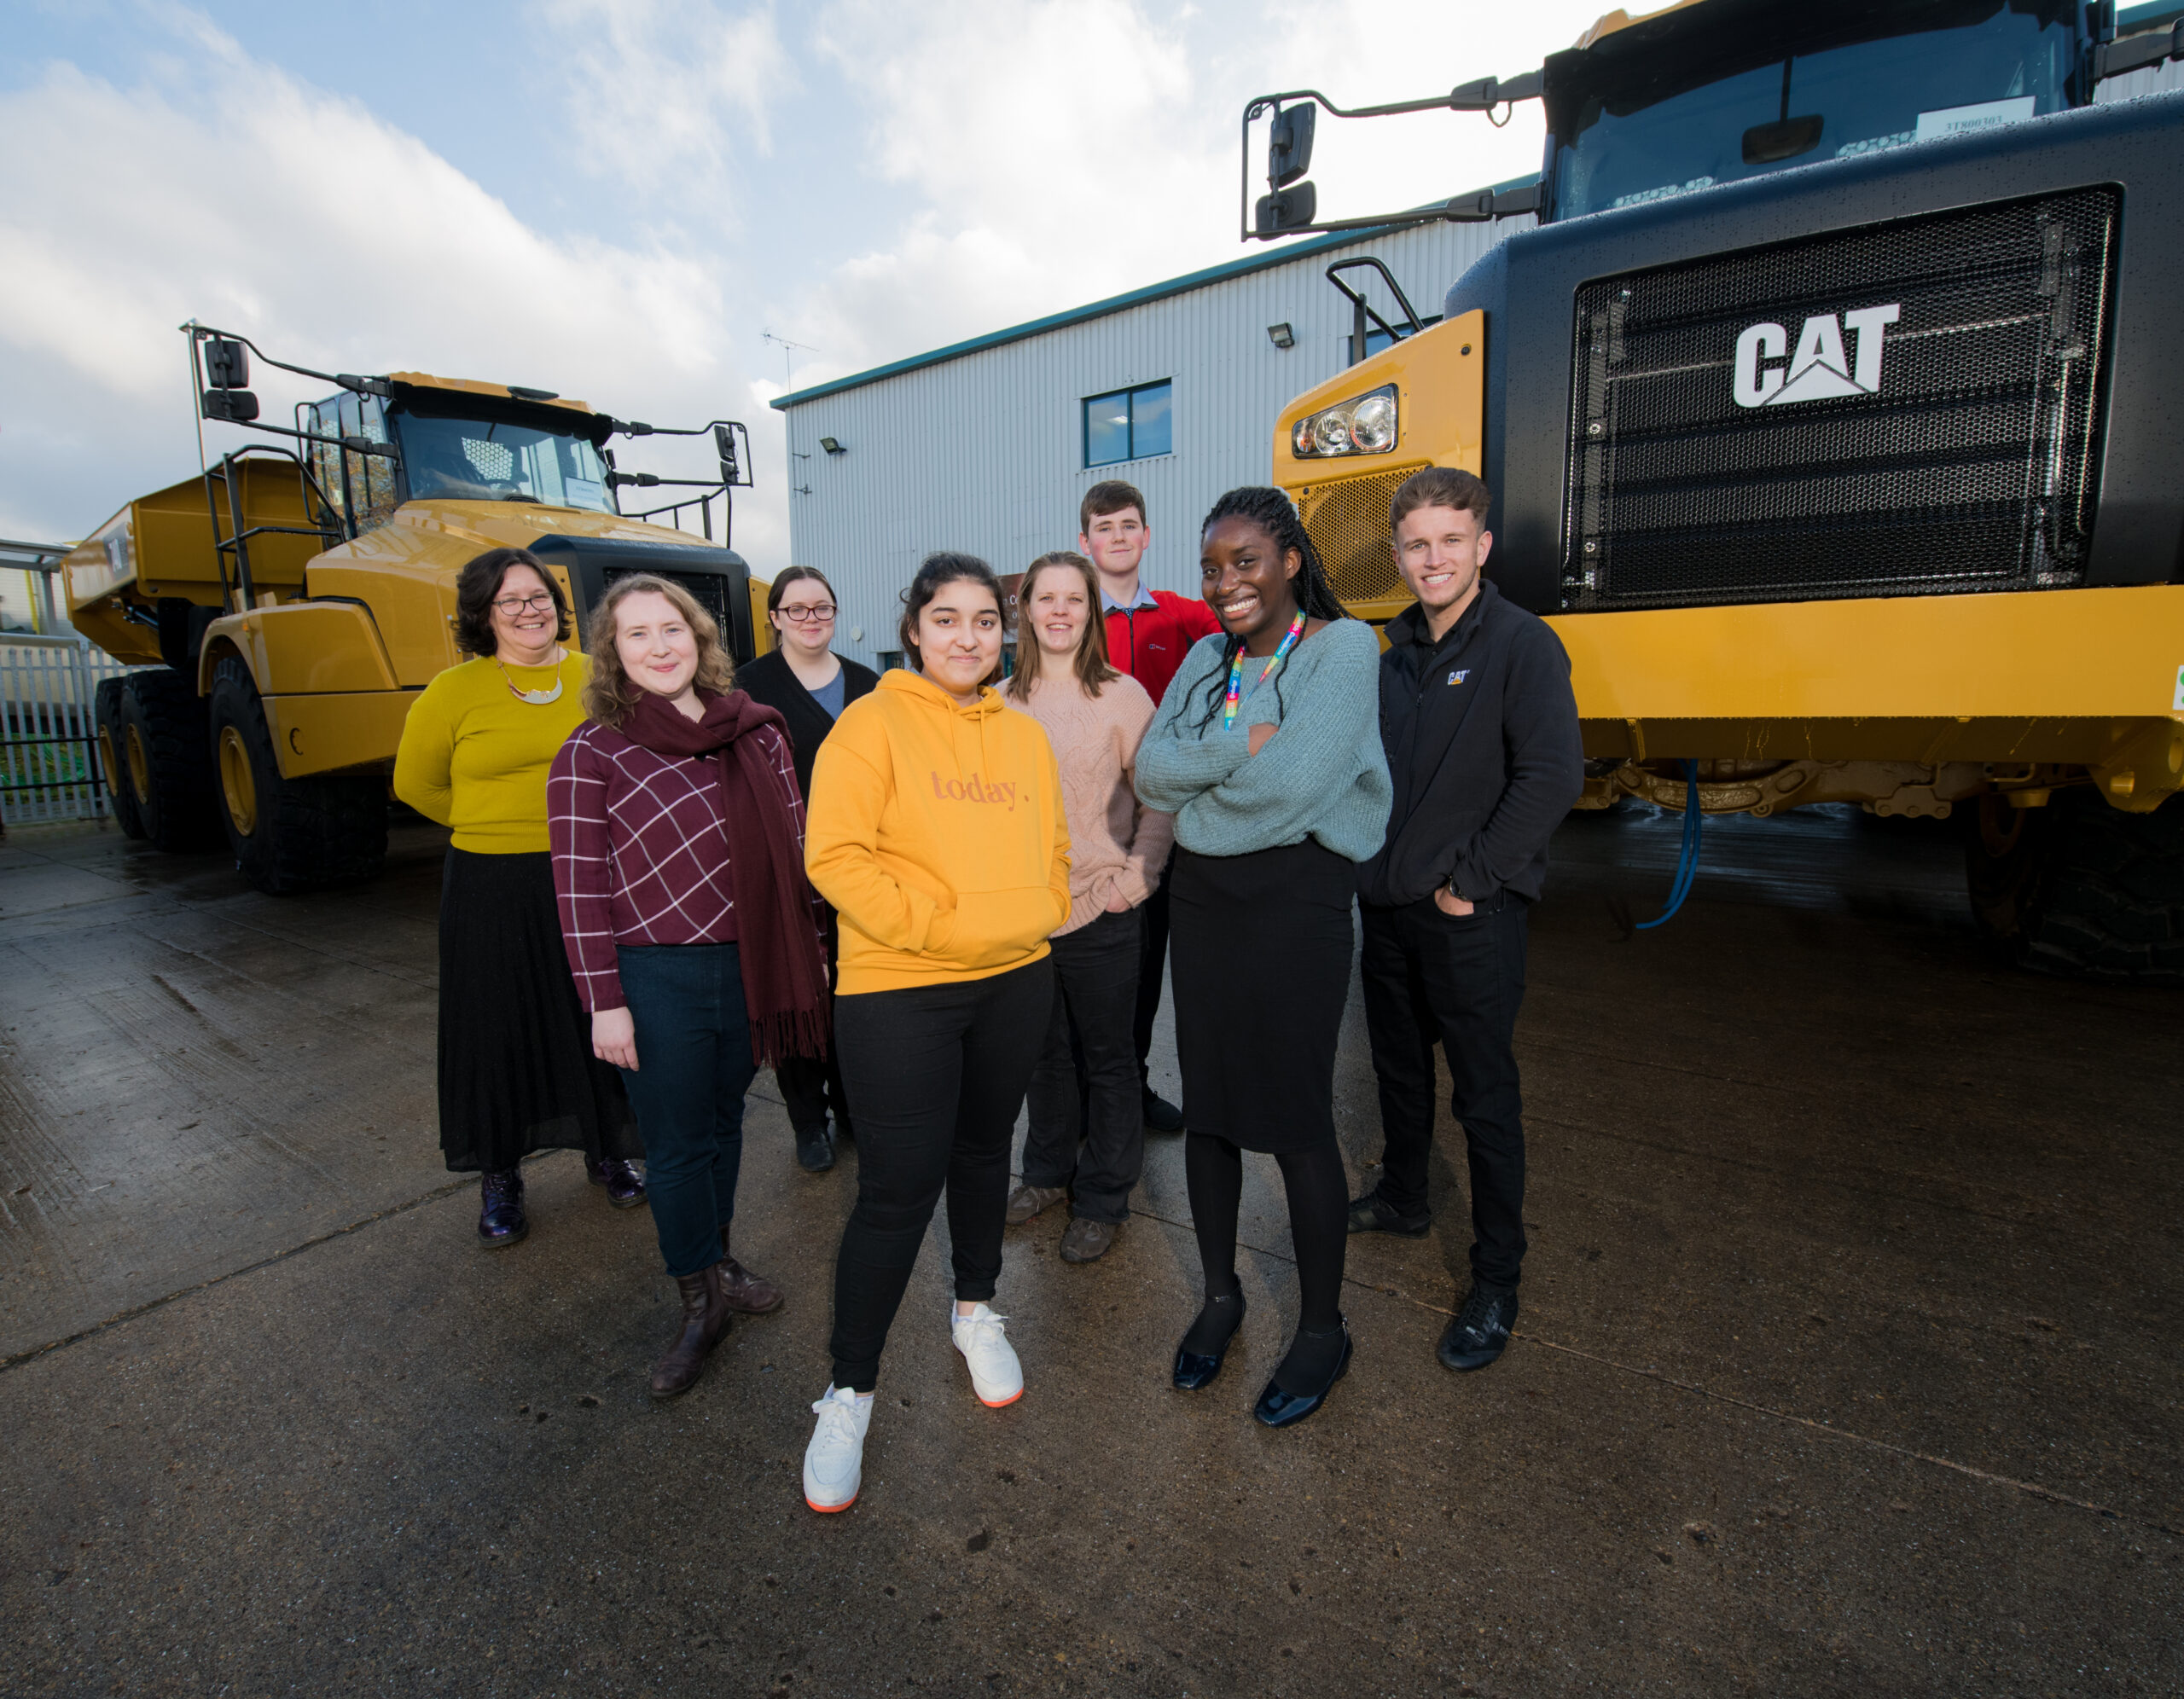 A group of young people standing smiling with a Kids in Museums staff membe in front of Caterpillar vehicles.